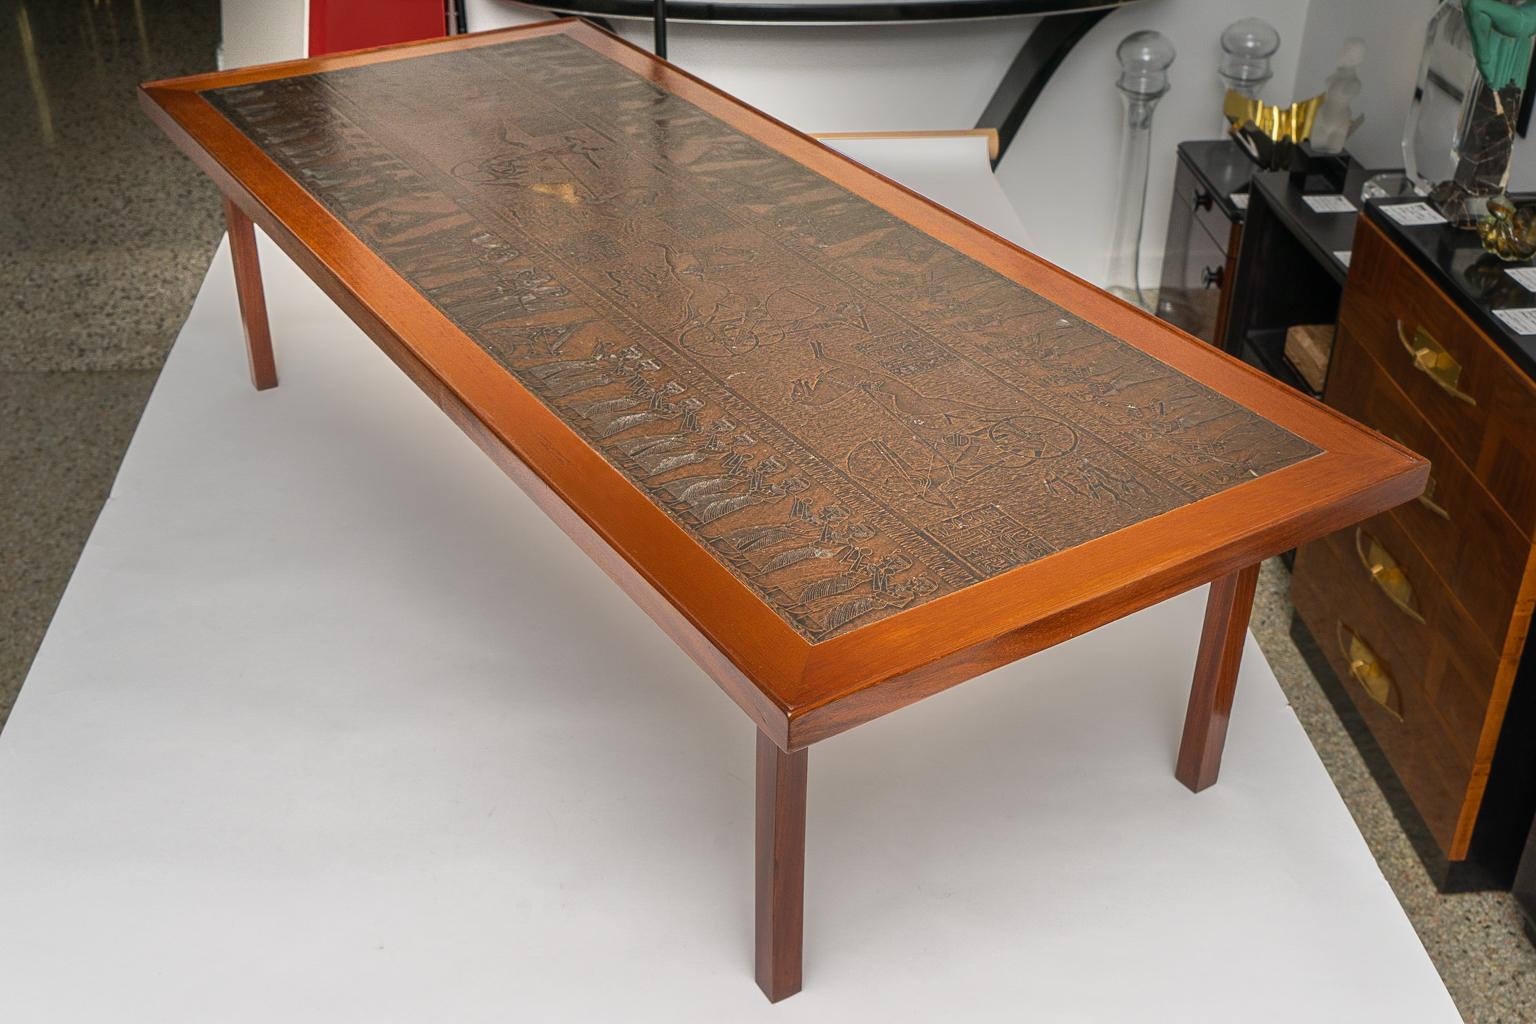 This stylish and chic midcentury Danish cocktail table will make a definite statement with its copper top which is embossed with stylized Egyptian motifs and characters. 

Note: The piece has been professionally restored as of August, 2019.